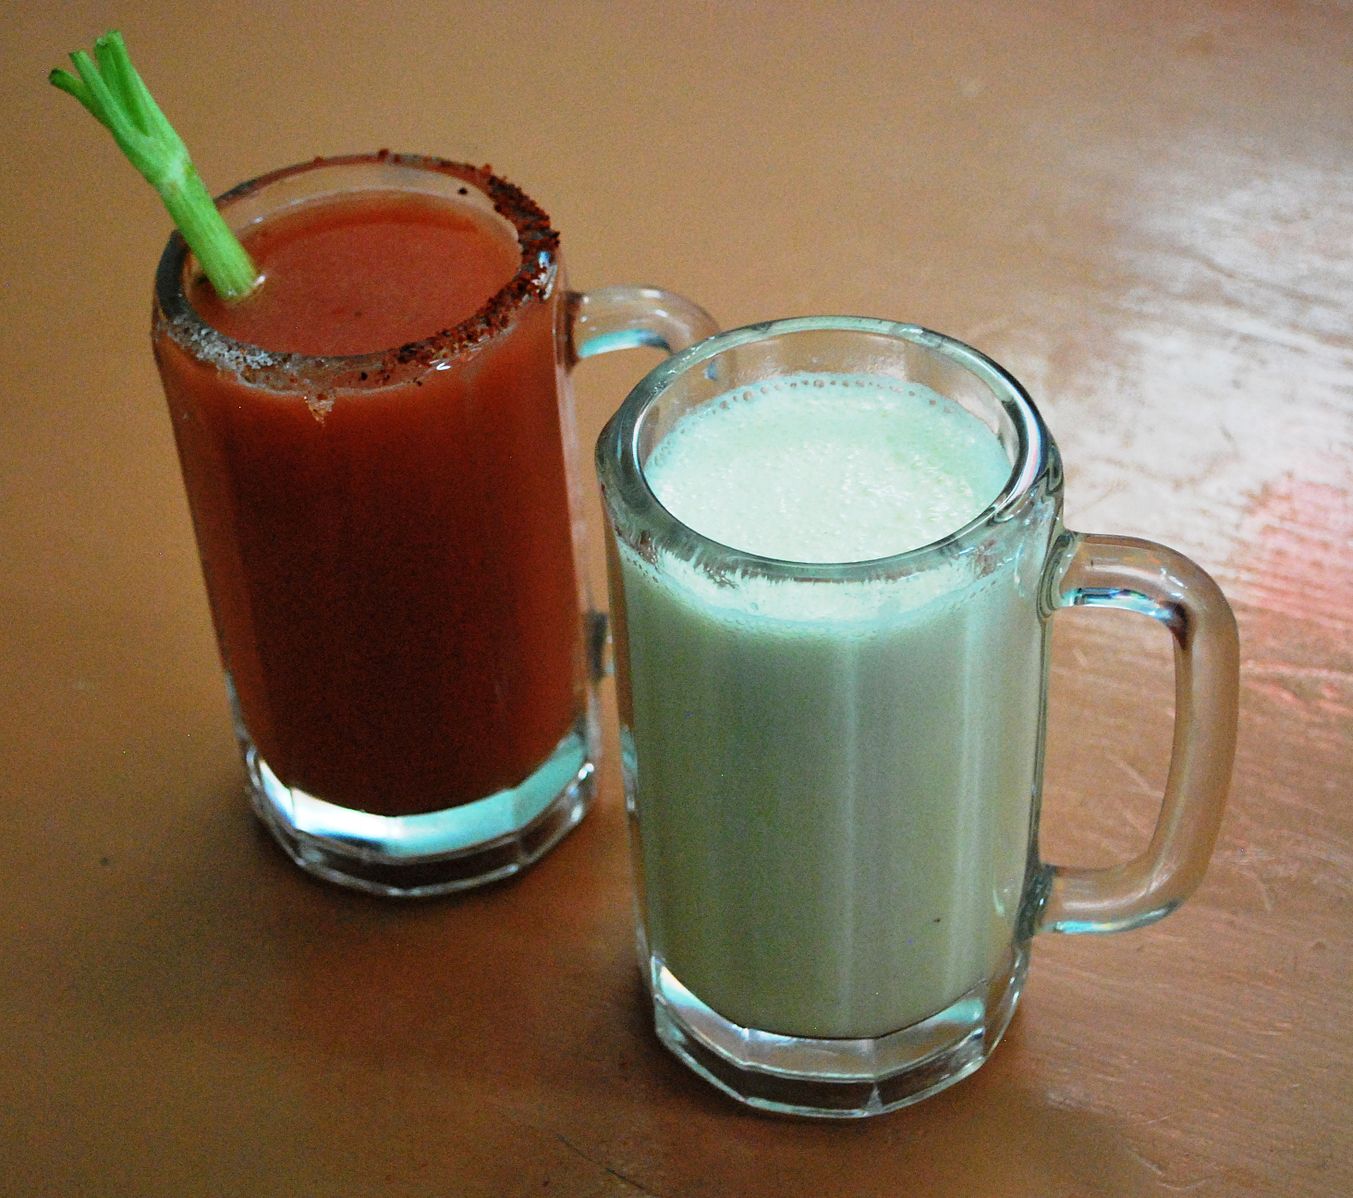 Pulque: The Traditional Mexican Fermented Alcoholic Drink